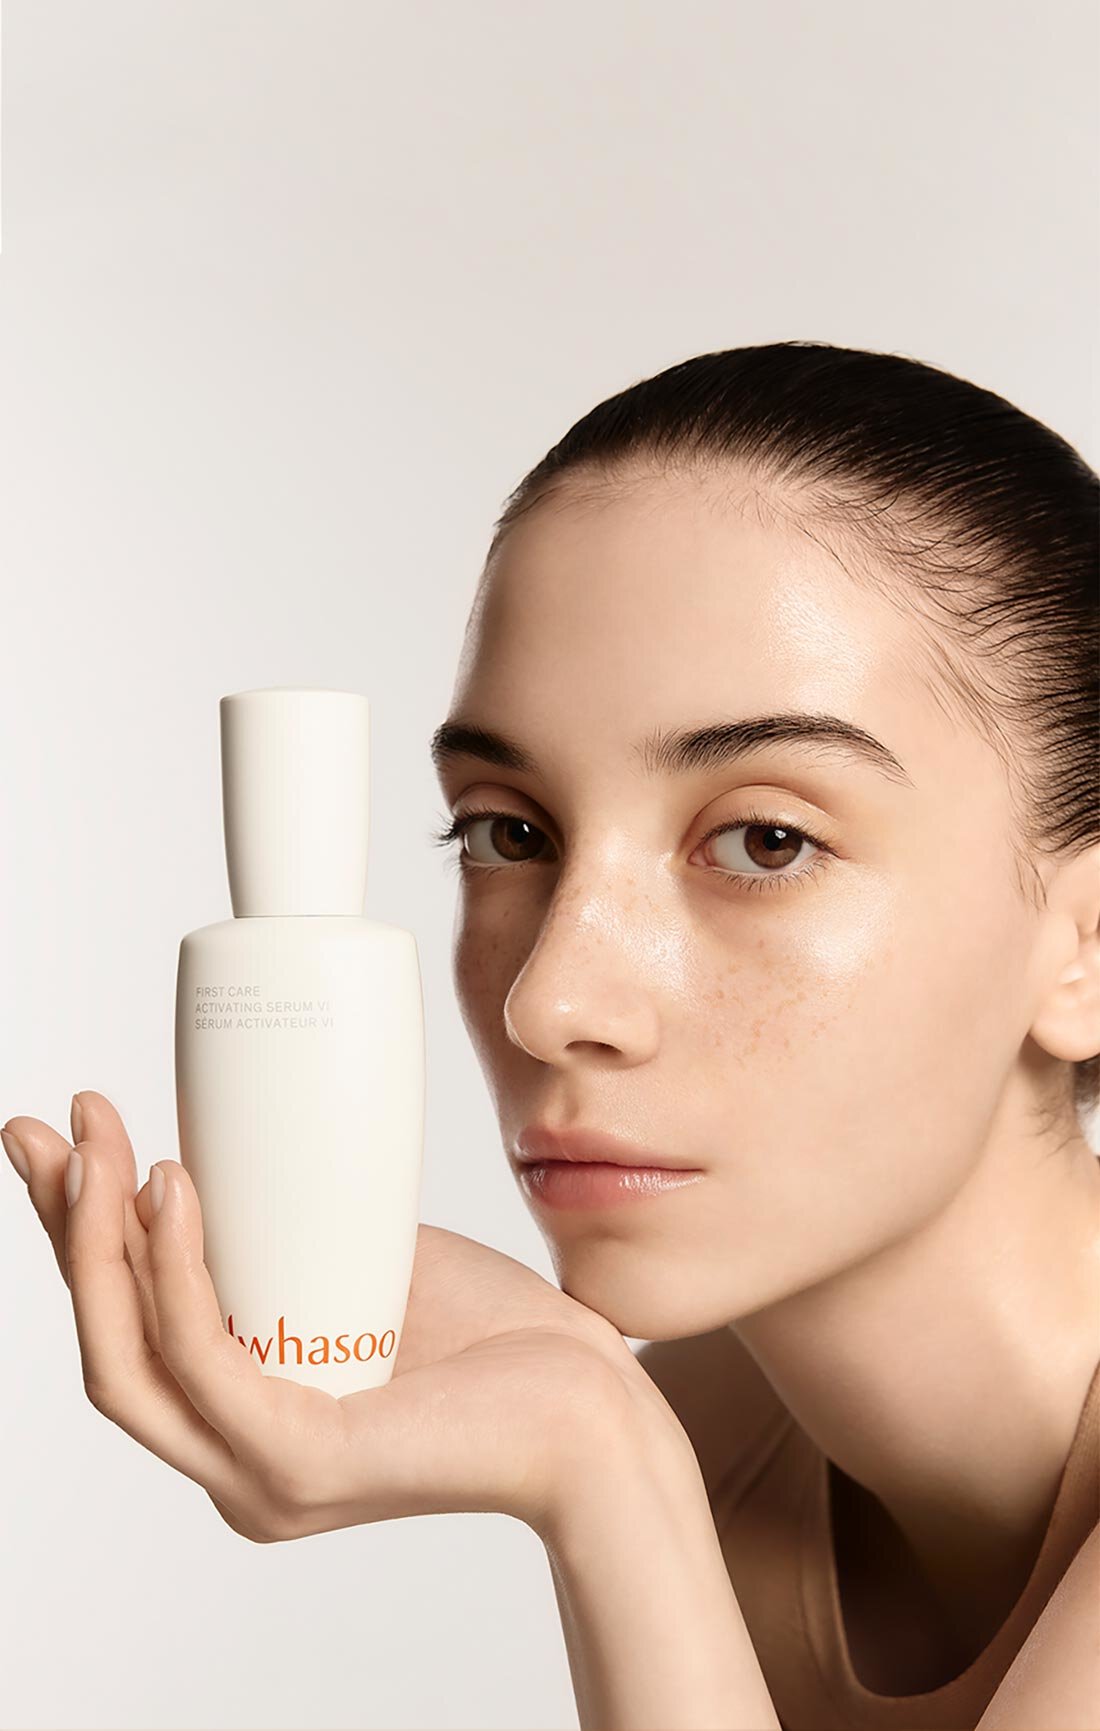 Apply Sulwhasoo First Care Activating Serum, the anti-aging serum after facial cleansing and before using face moisturizers to leave your skin smoothing, regenerated and more radiant